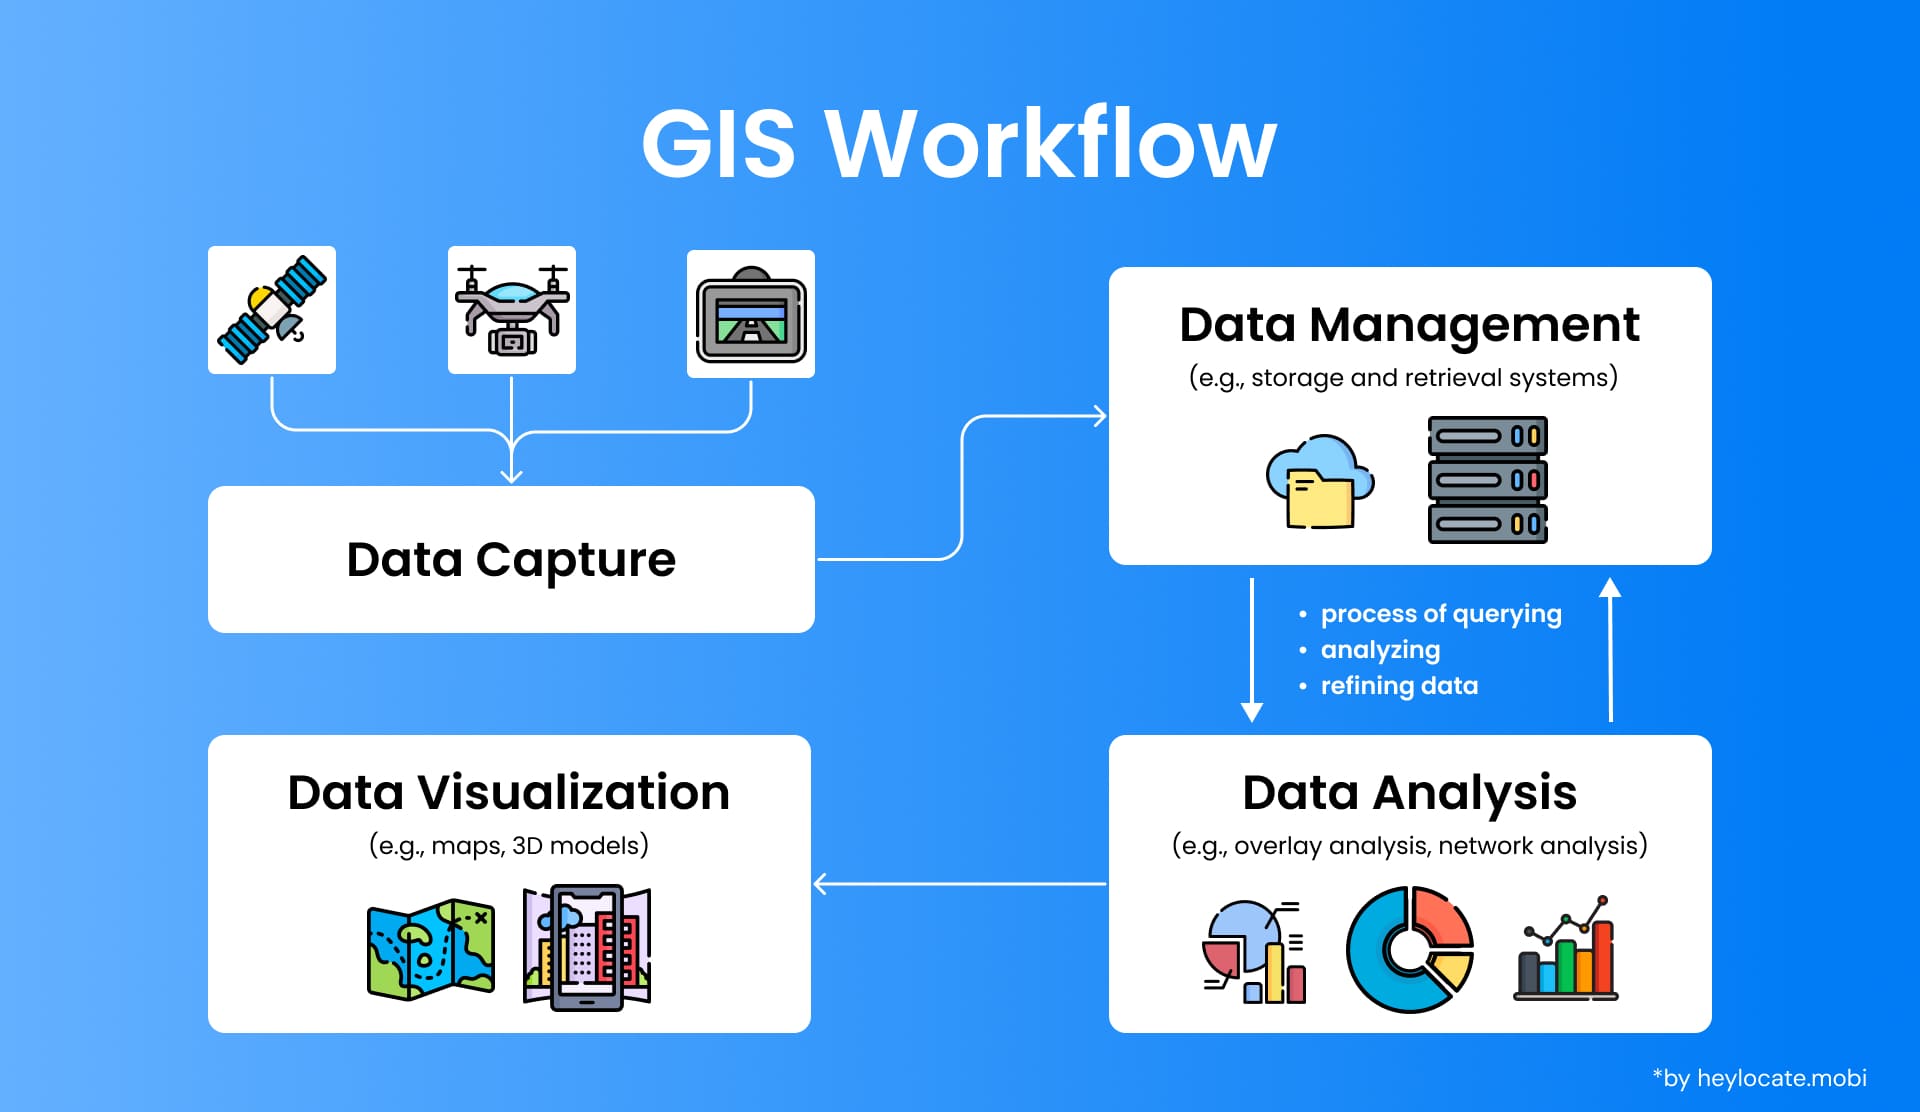 Flowchart illustrating the GIS workflow including data capture, data management, data visualization, and data analysis